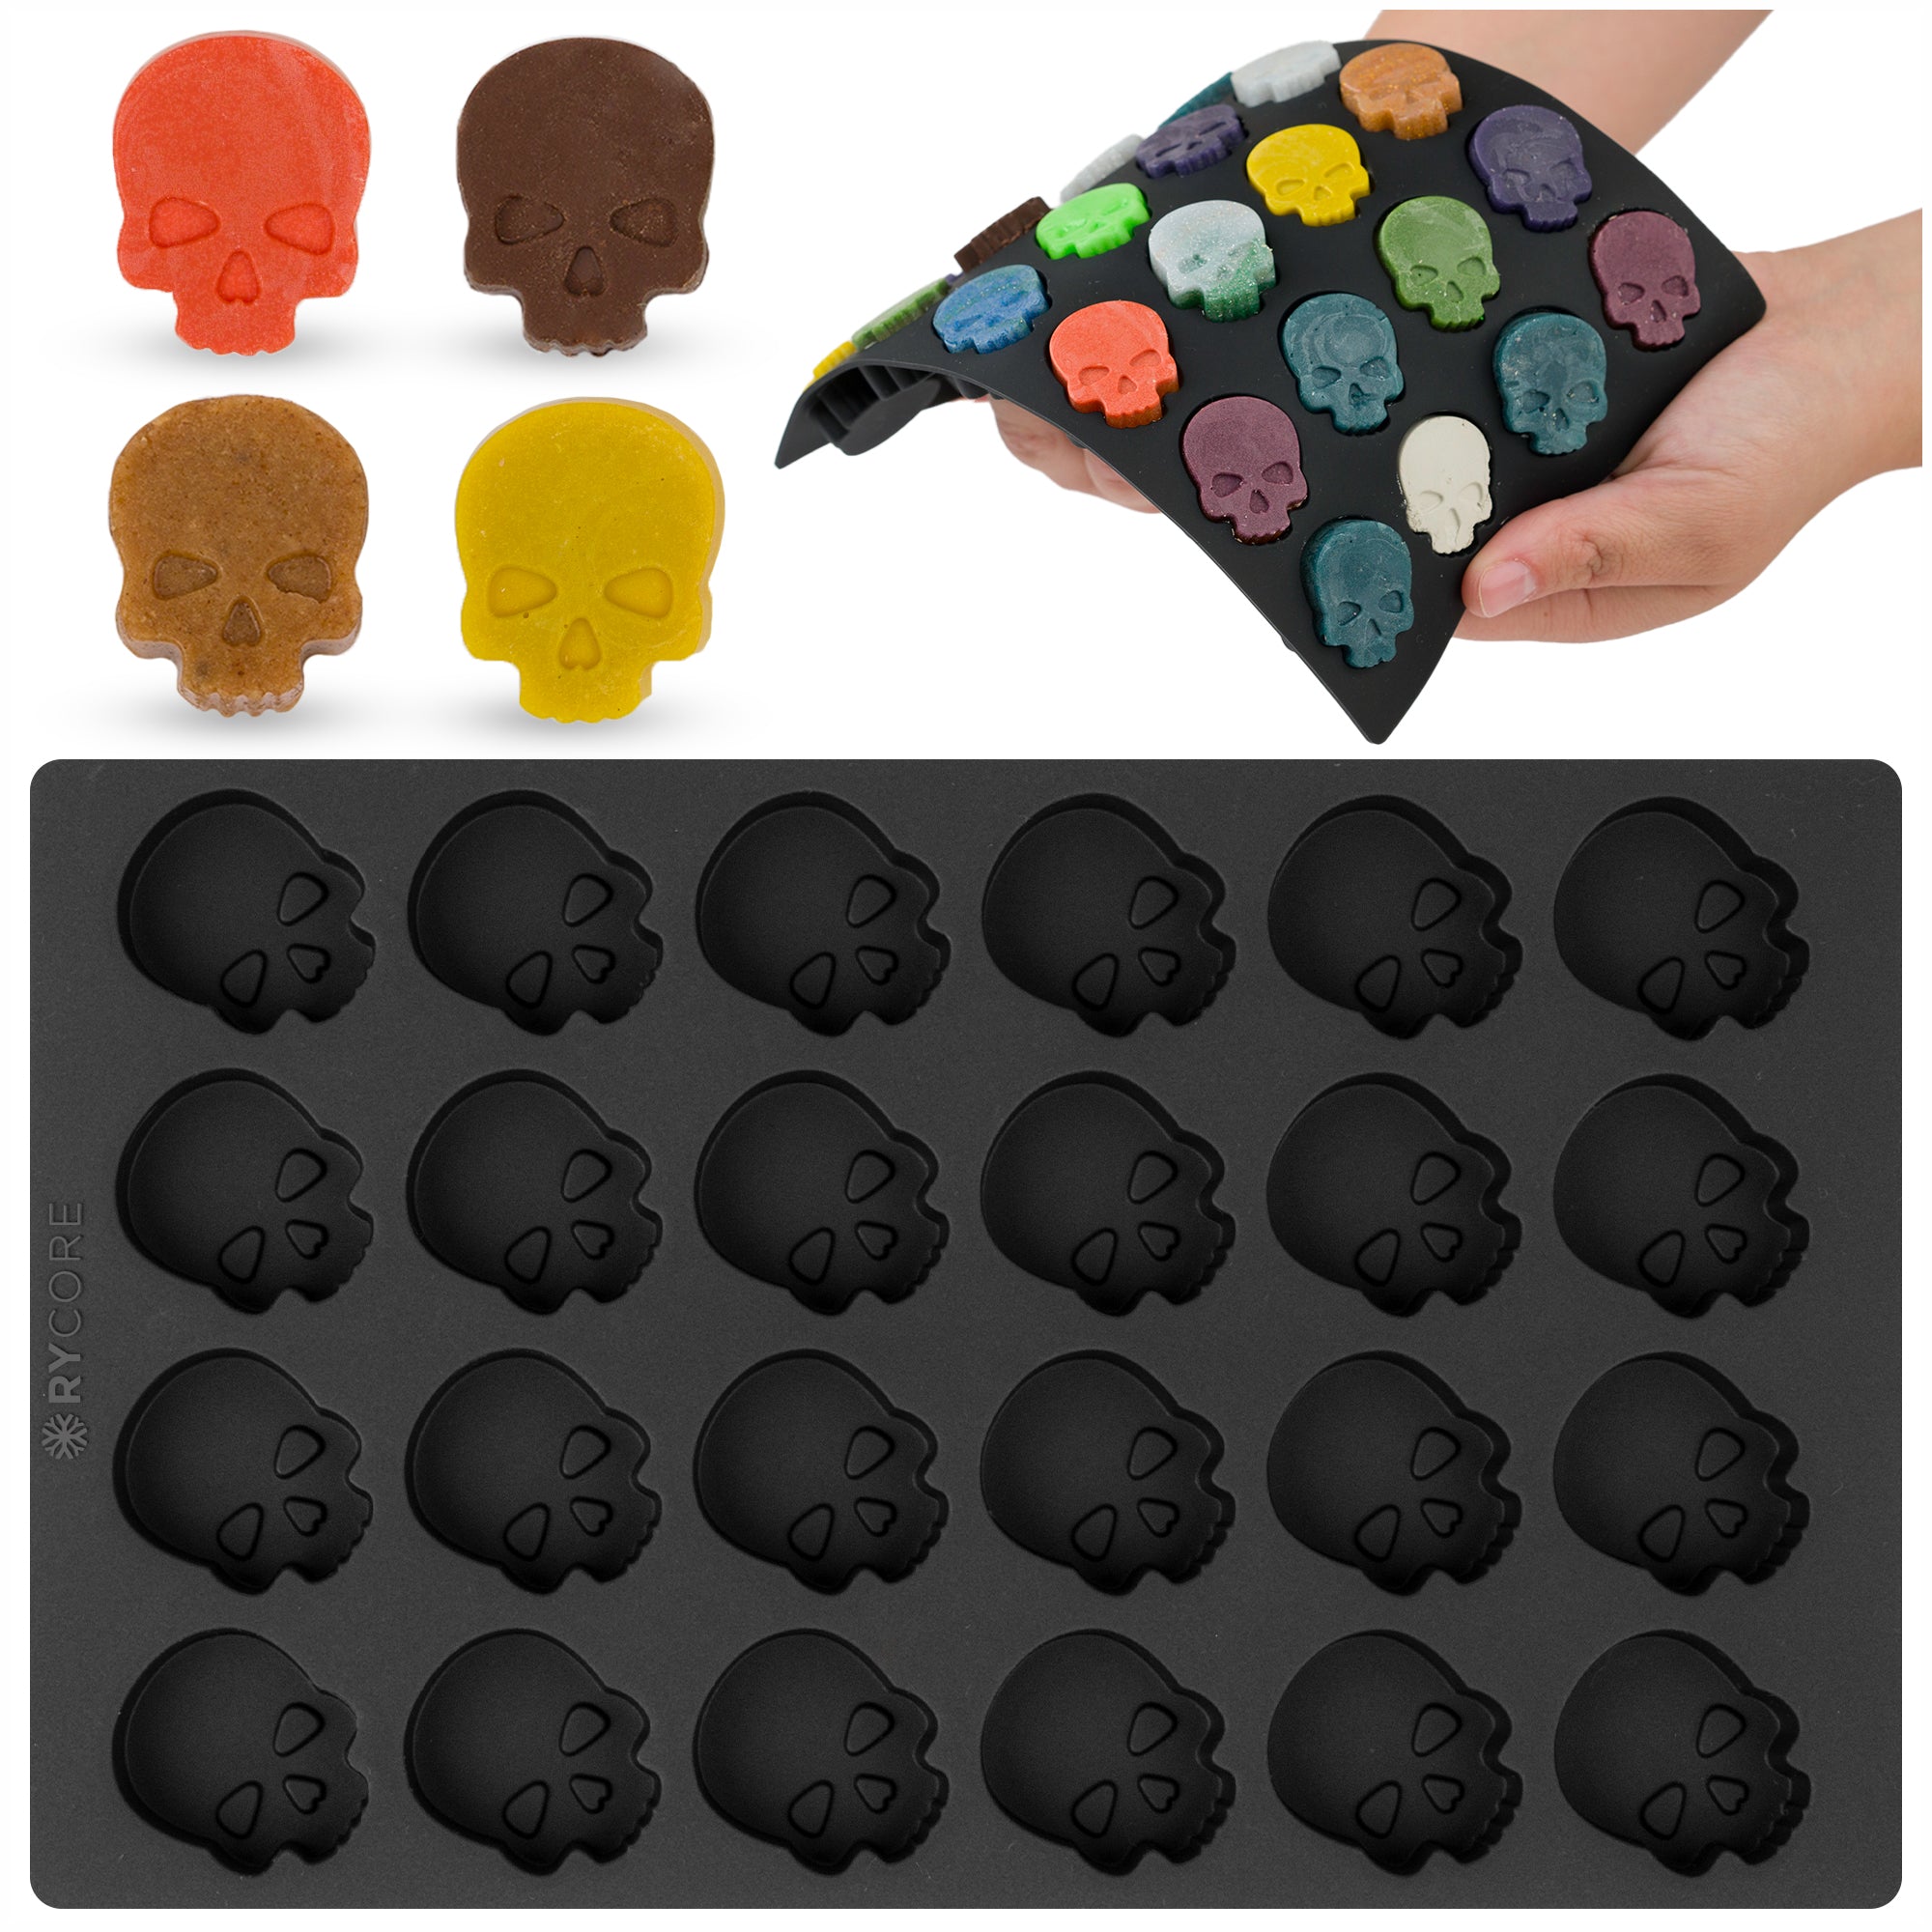 RYCORE Silicone Skull Mold for Baking, Chocolates & Desserts | Mini Mold for Candy